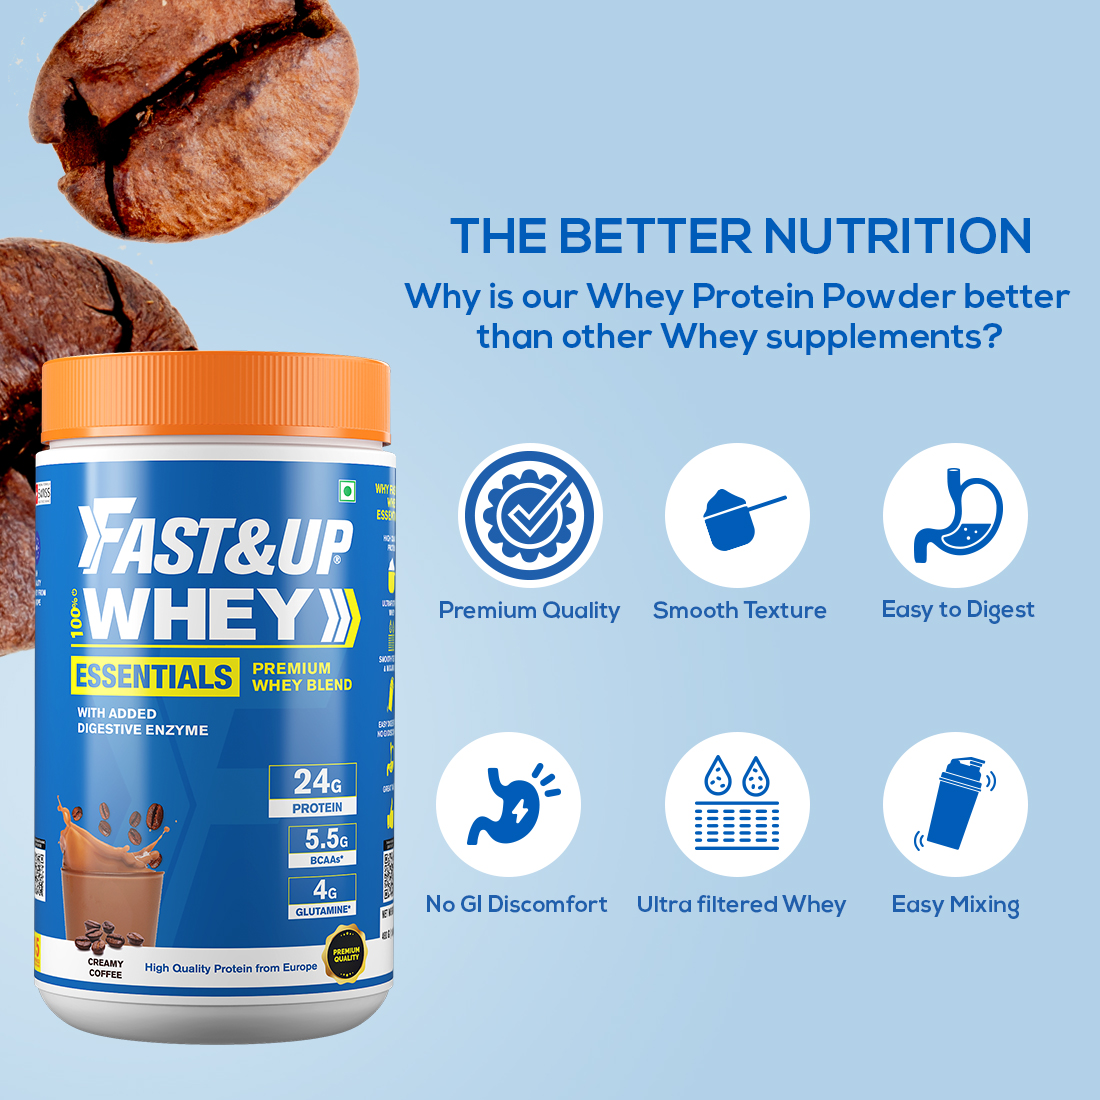 Fast&Up Whey Essentials 1.058 Lb Creamy Coffee Flavour, Grass Fed Whey Powder From Europe, 24g Clean